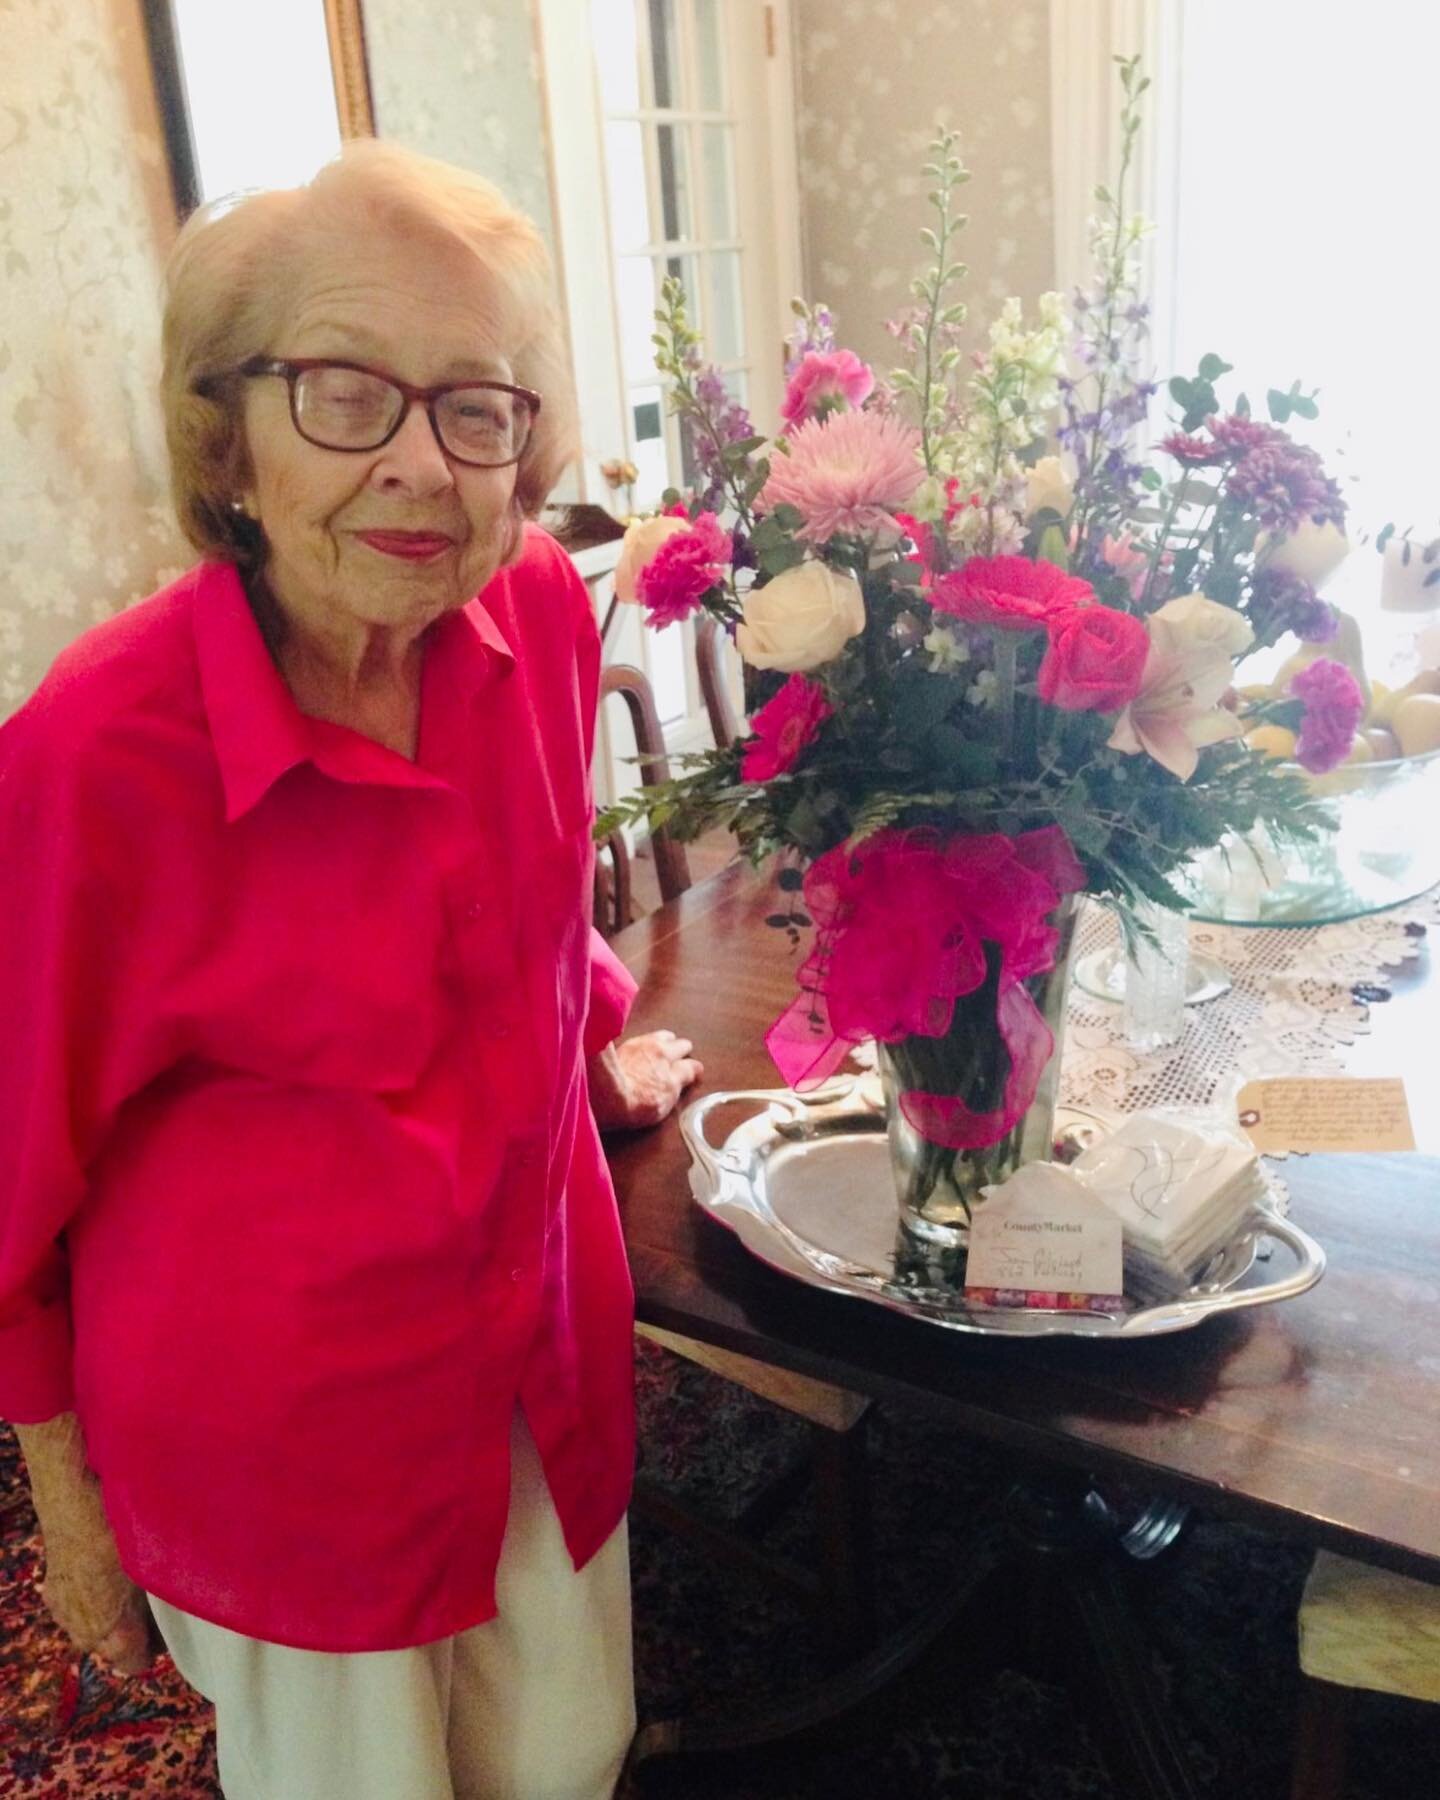 Happy birthday to the &ldquo;real&rdquo; JPG, Jean Patterson Gilchrist! May your day be filled with all the fresh flowers heaven can offer! 

💐For those that may not know, Joybird Planning Group is named to honor Madeline&rsquo;s precious Grandmothe